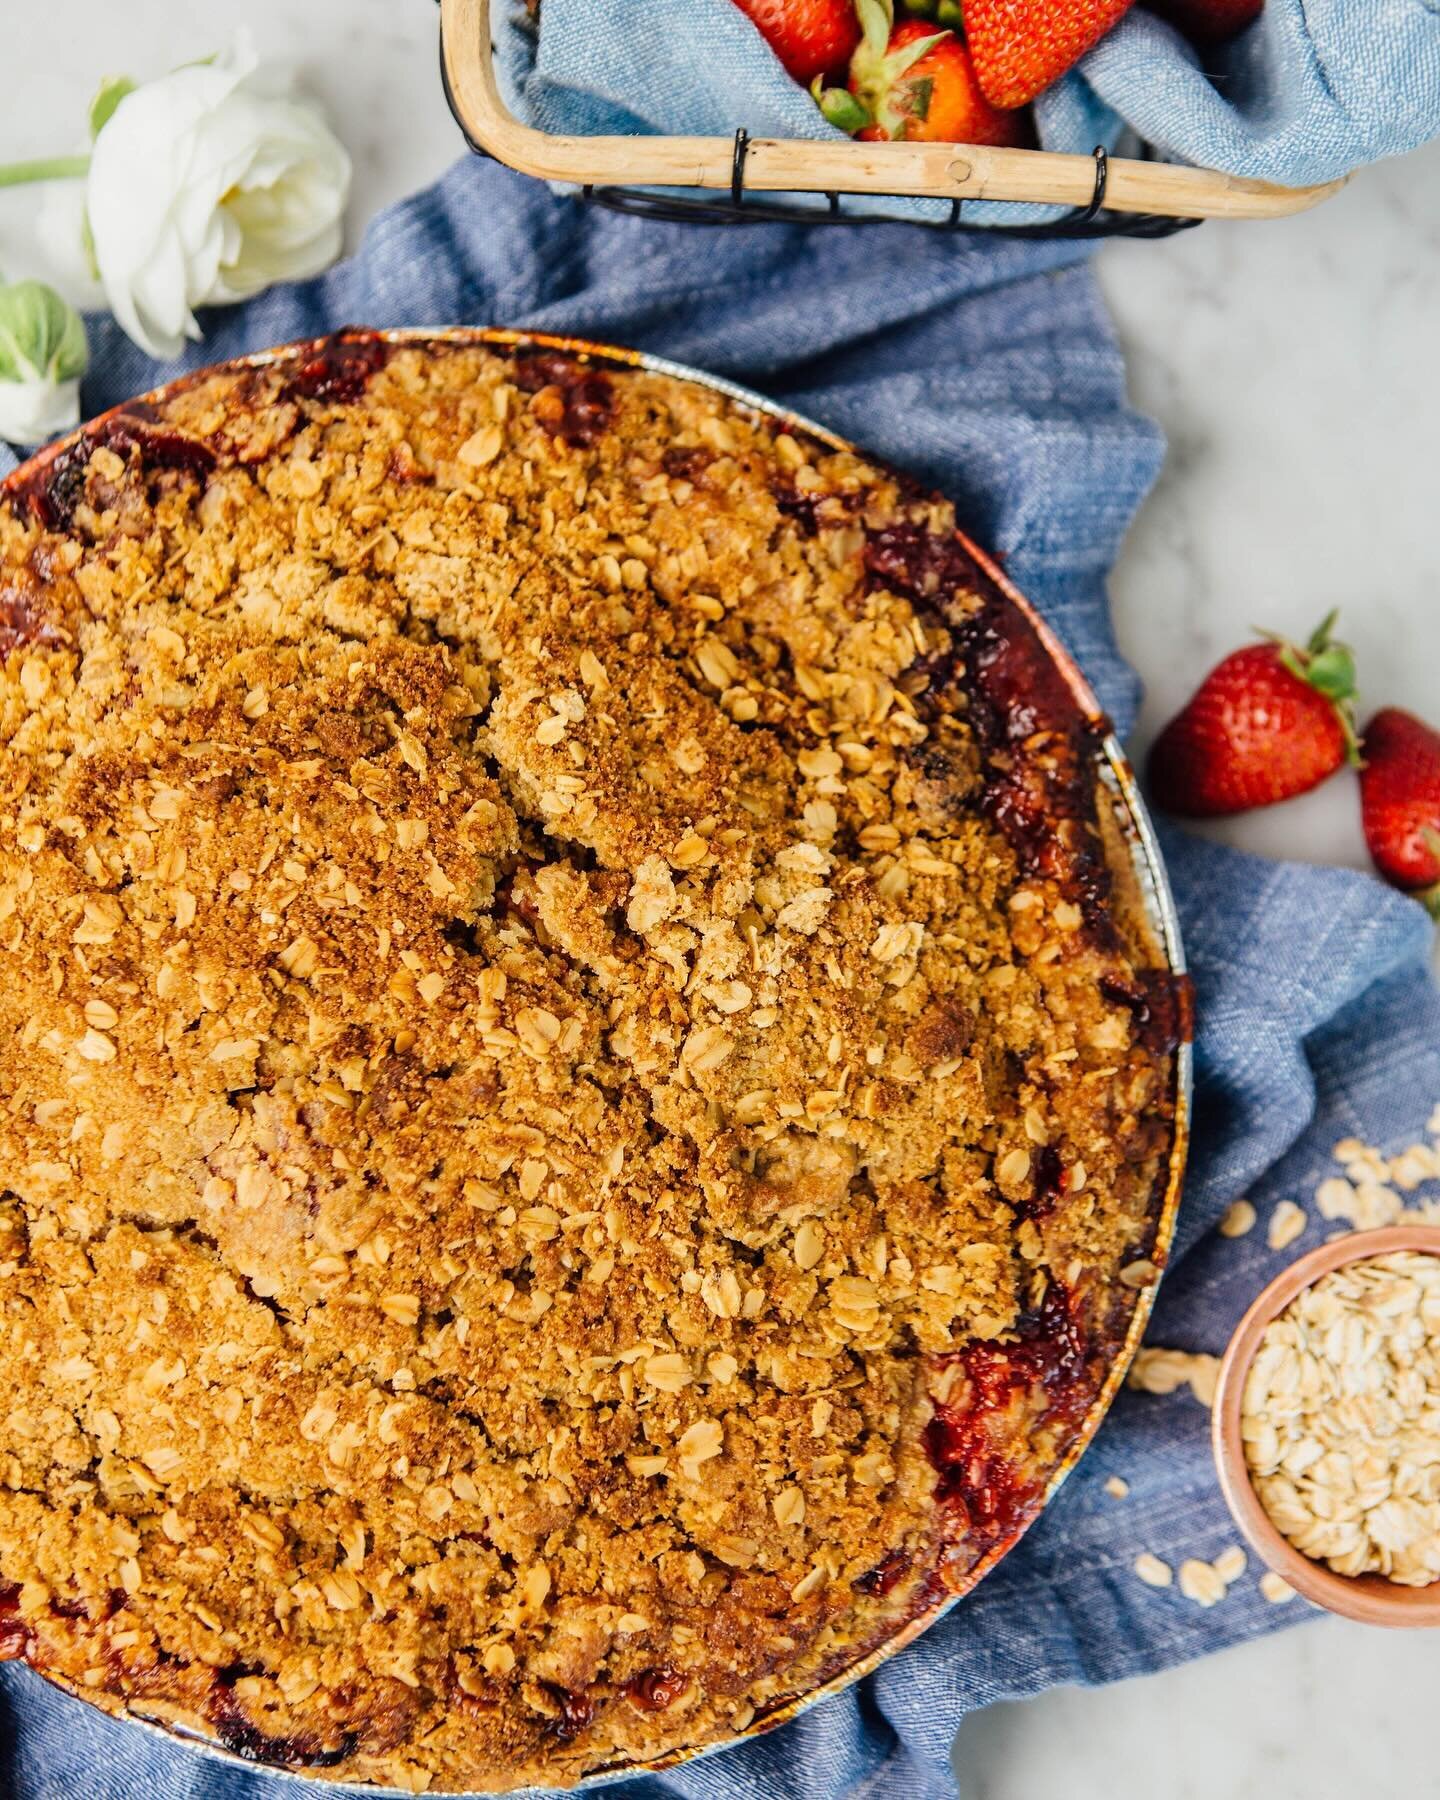 👋 Strawberry Rhubarb Crumble! 🍓 

It&rsquo;s starting to feel like Spring around here (especially with Spring Break around the corner!) Our Strawberry Rhubarb pie is now in the pie shops! It&rsquo;s a favorite for those in the know!

Fresh strawber